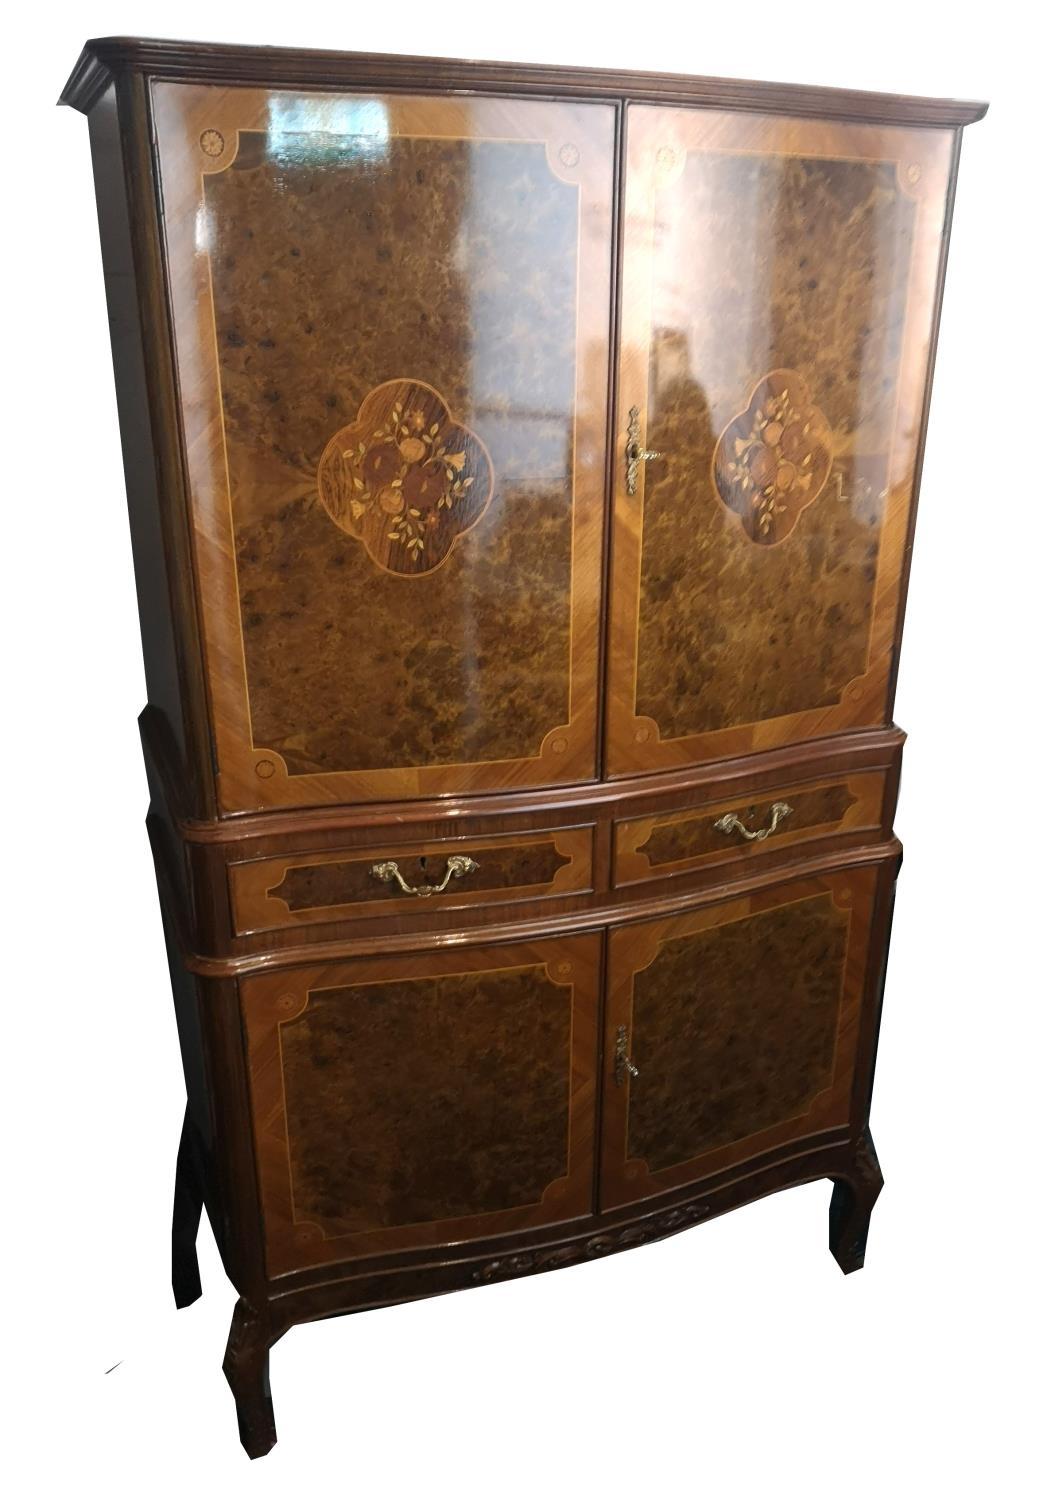 AN ITALIAN WALNUT AND FLORAL INLAID DRINK’S CABINET With two four doors and central drawers. (86cm x